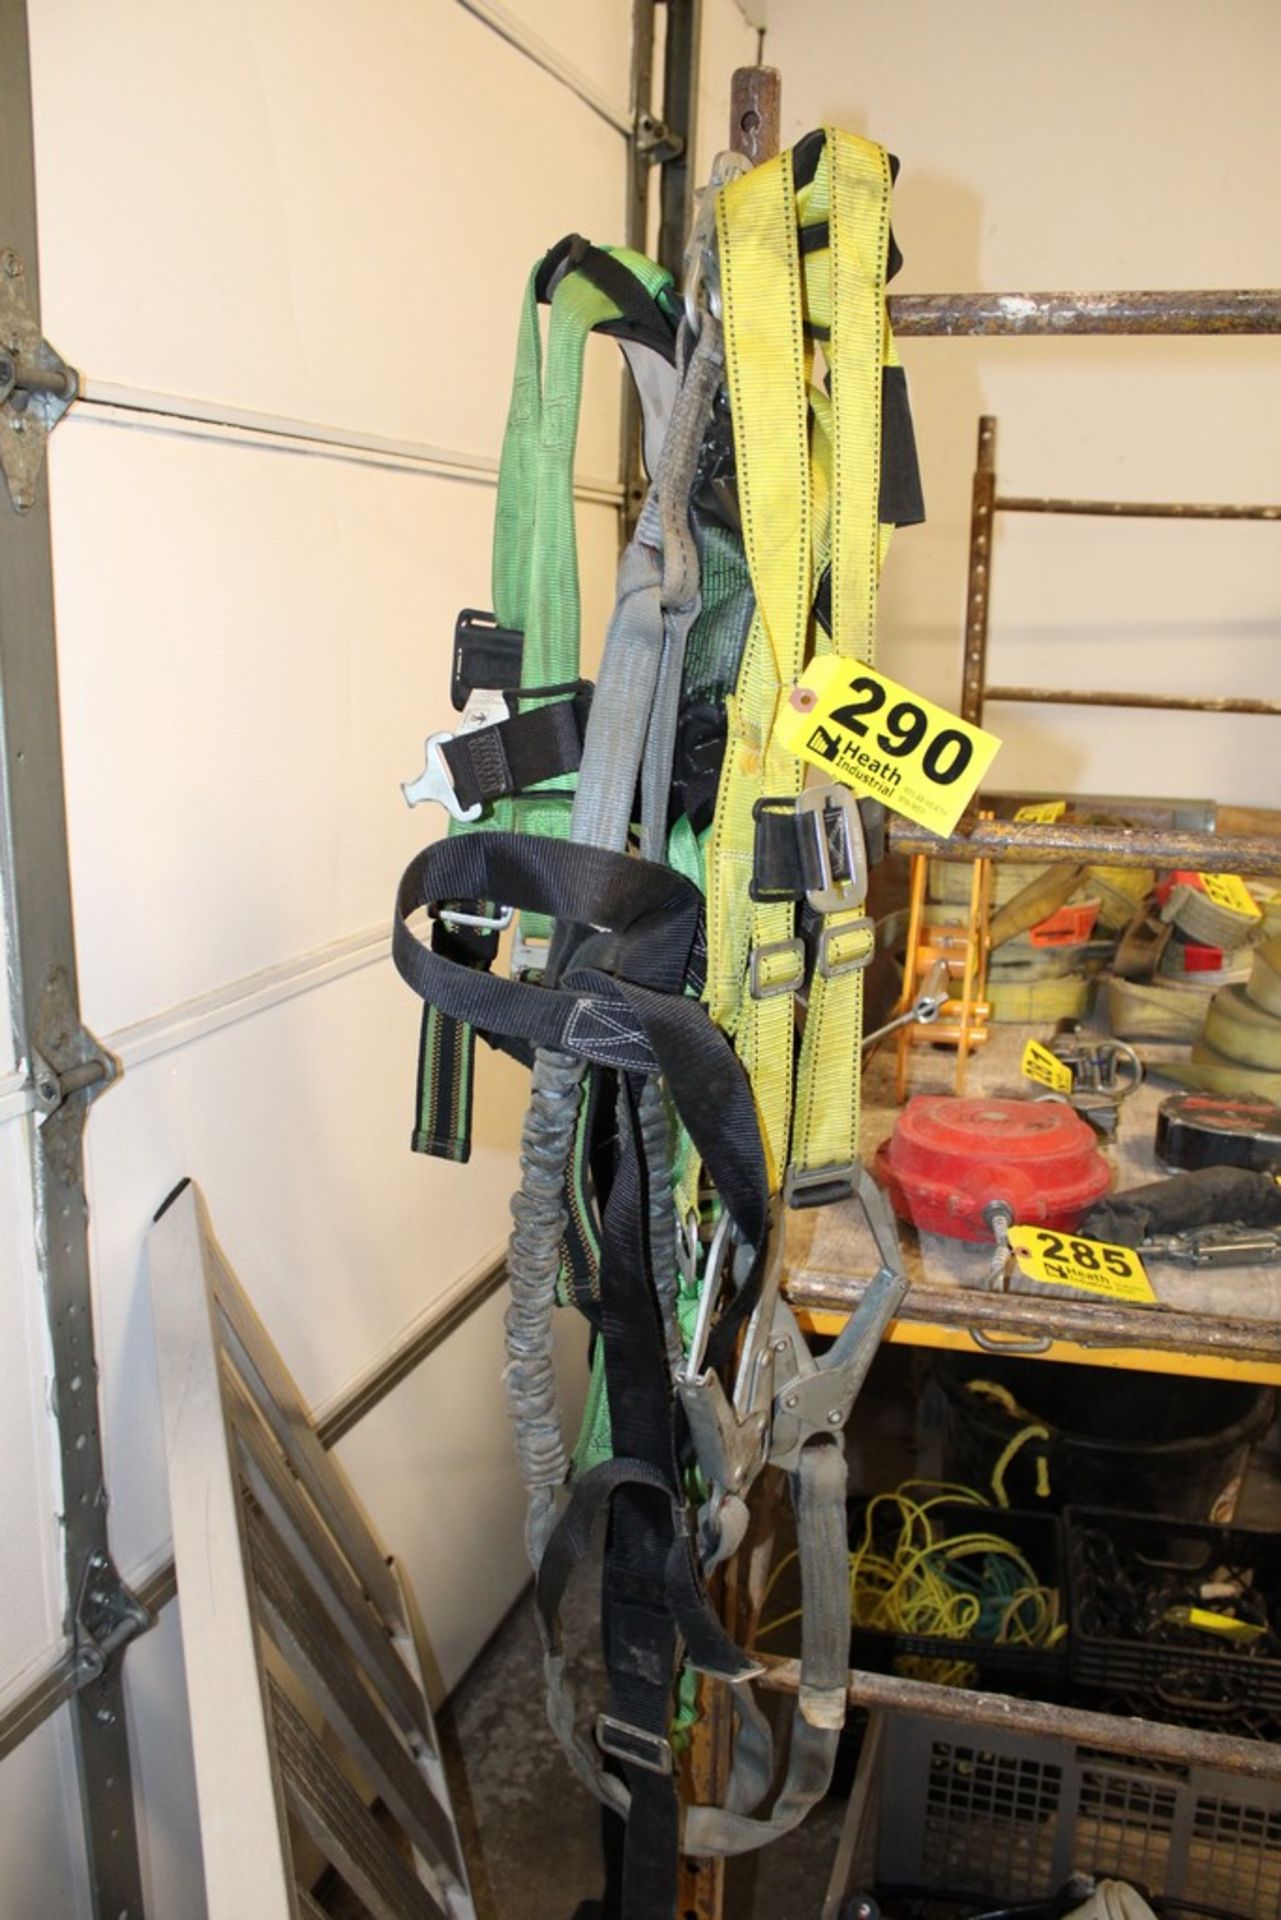 (2) SAFETY HARNESSES